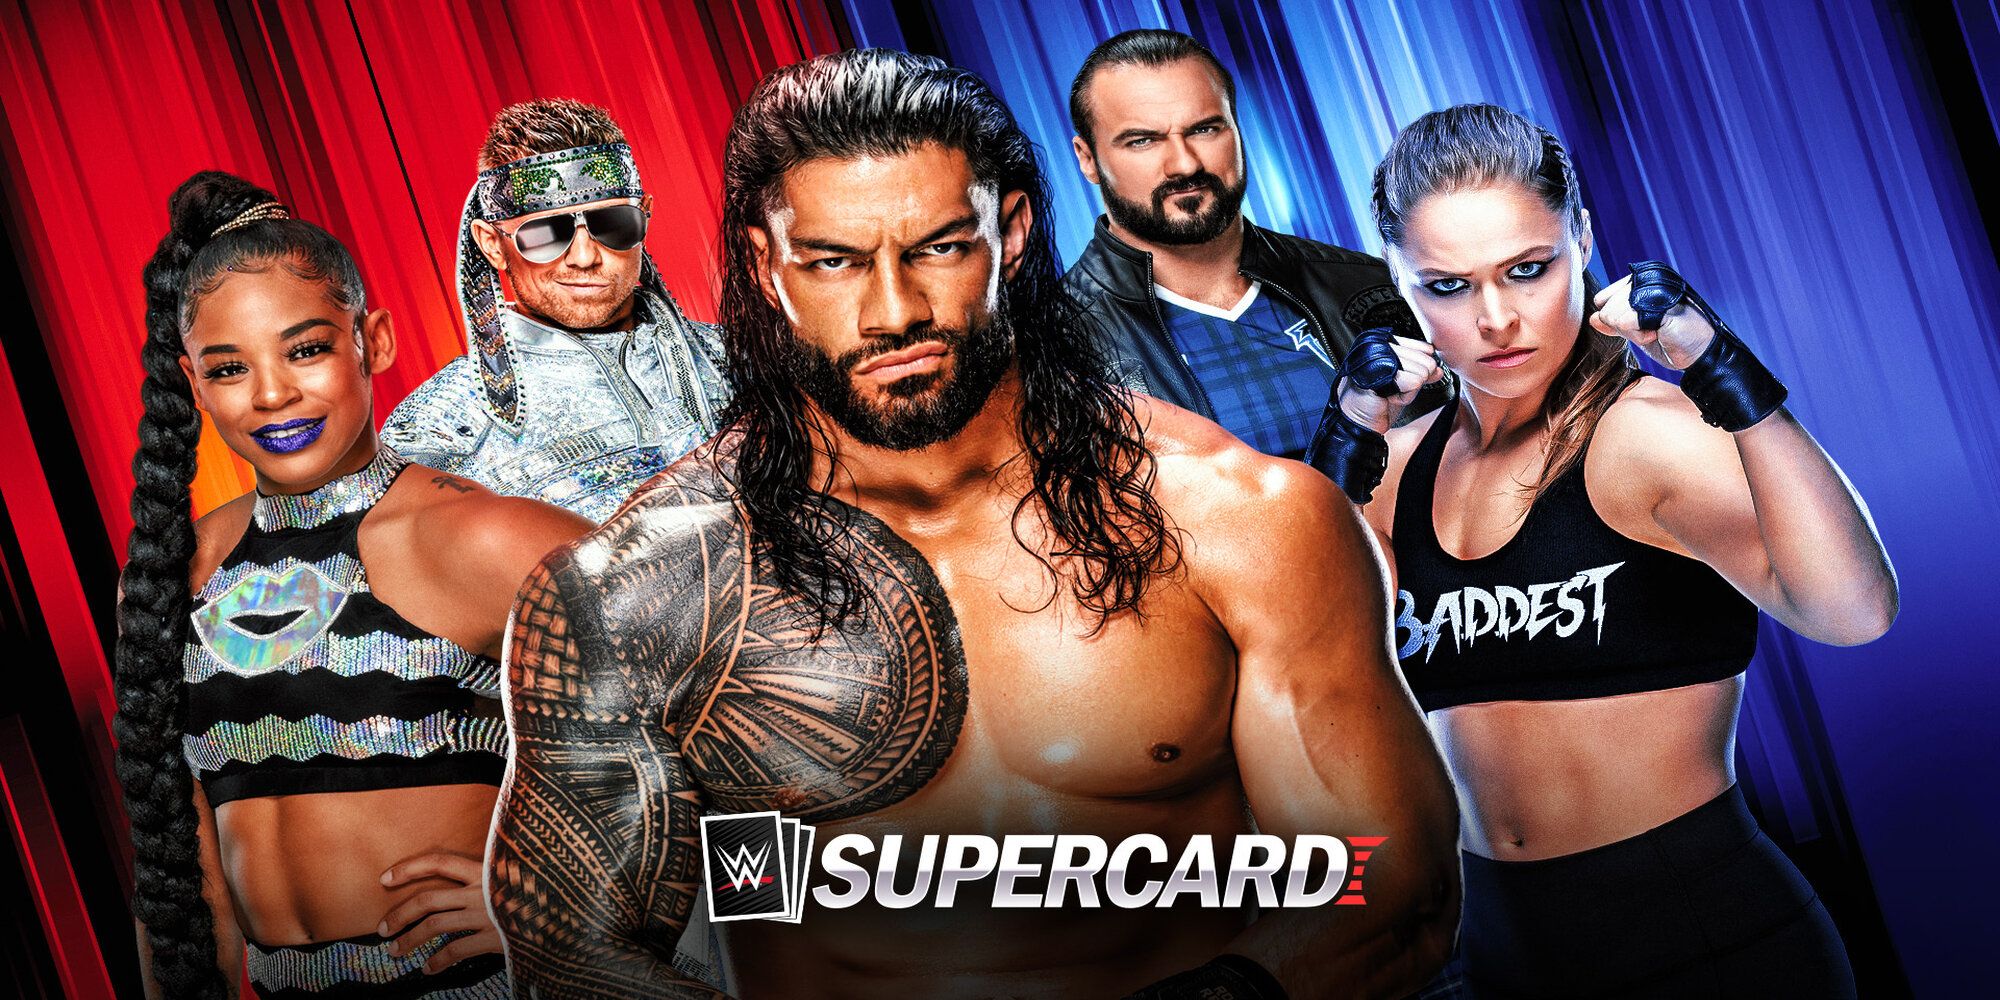 wwe supercard game featuring Roman Reigns, Bianca Belair, Ronda Rousey, The Miz, and announcer Michael Cole